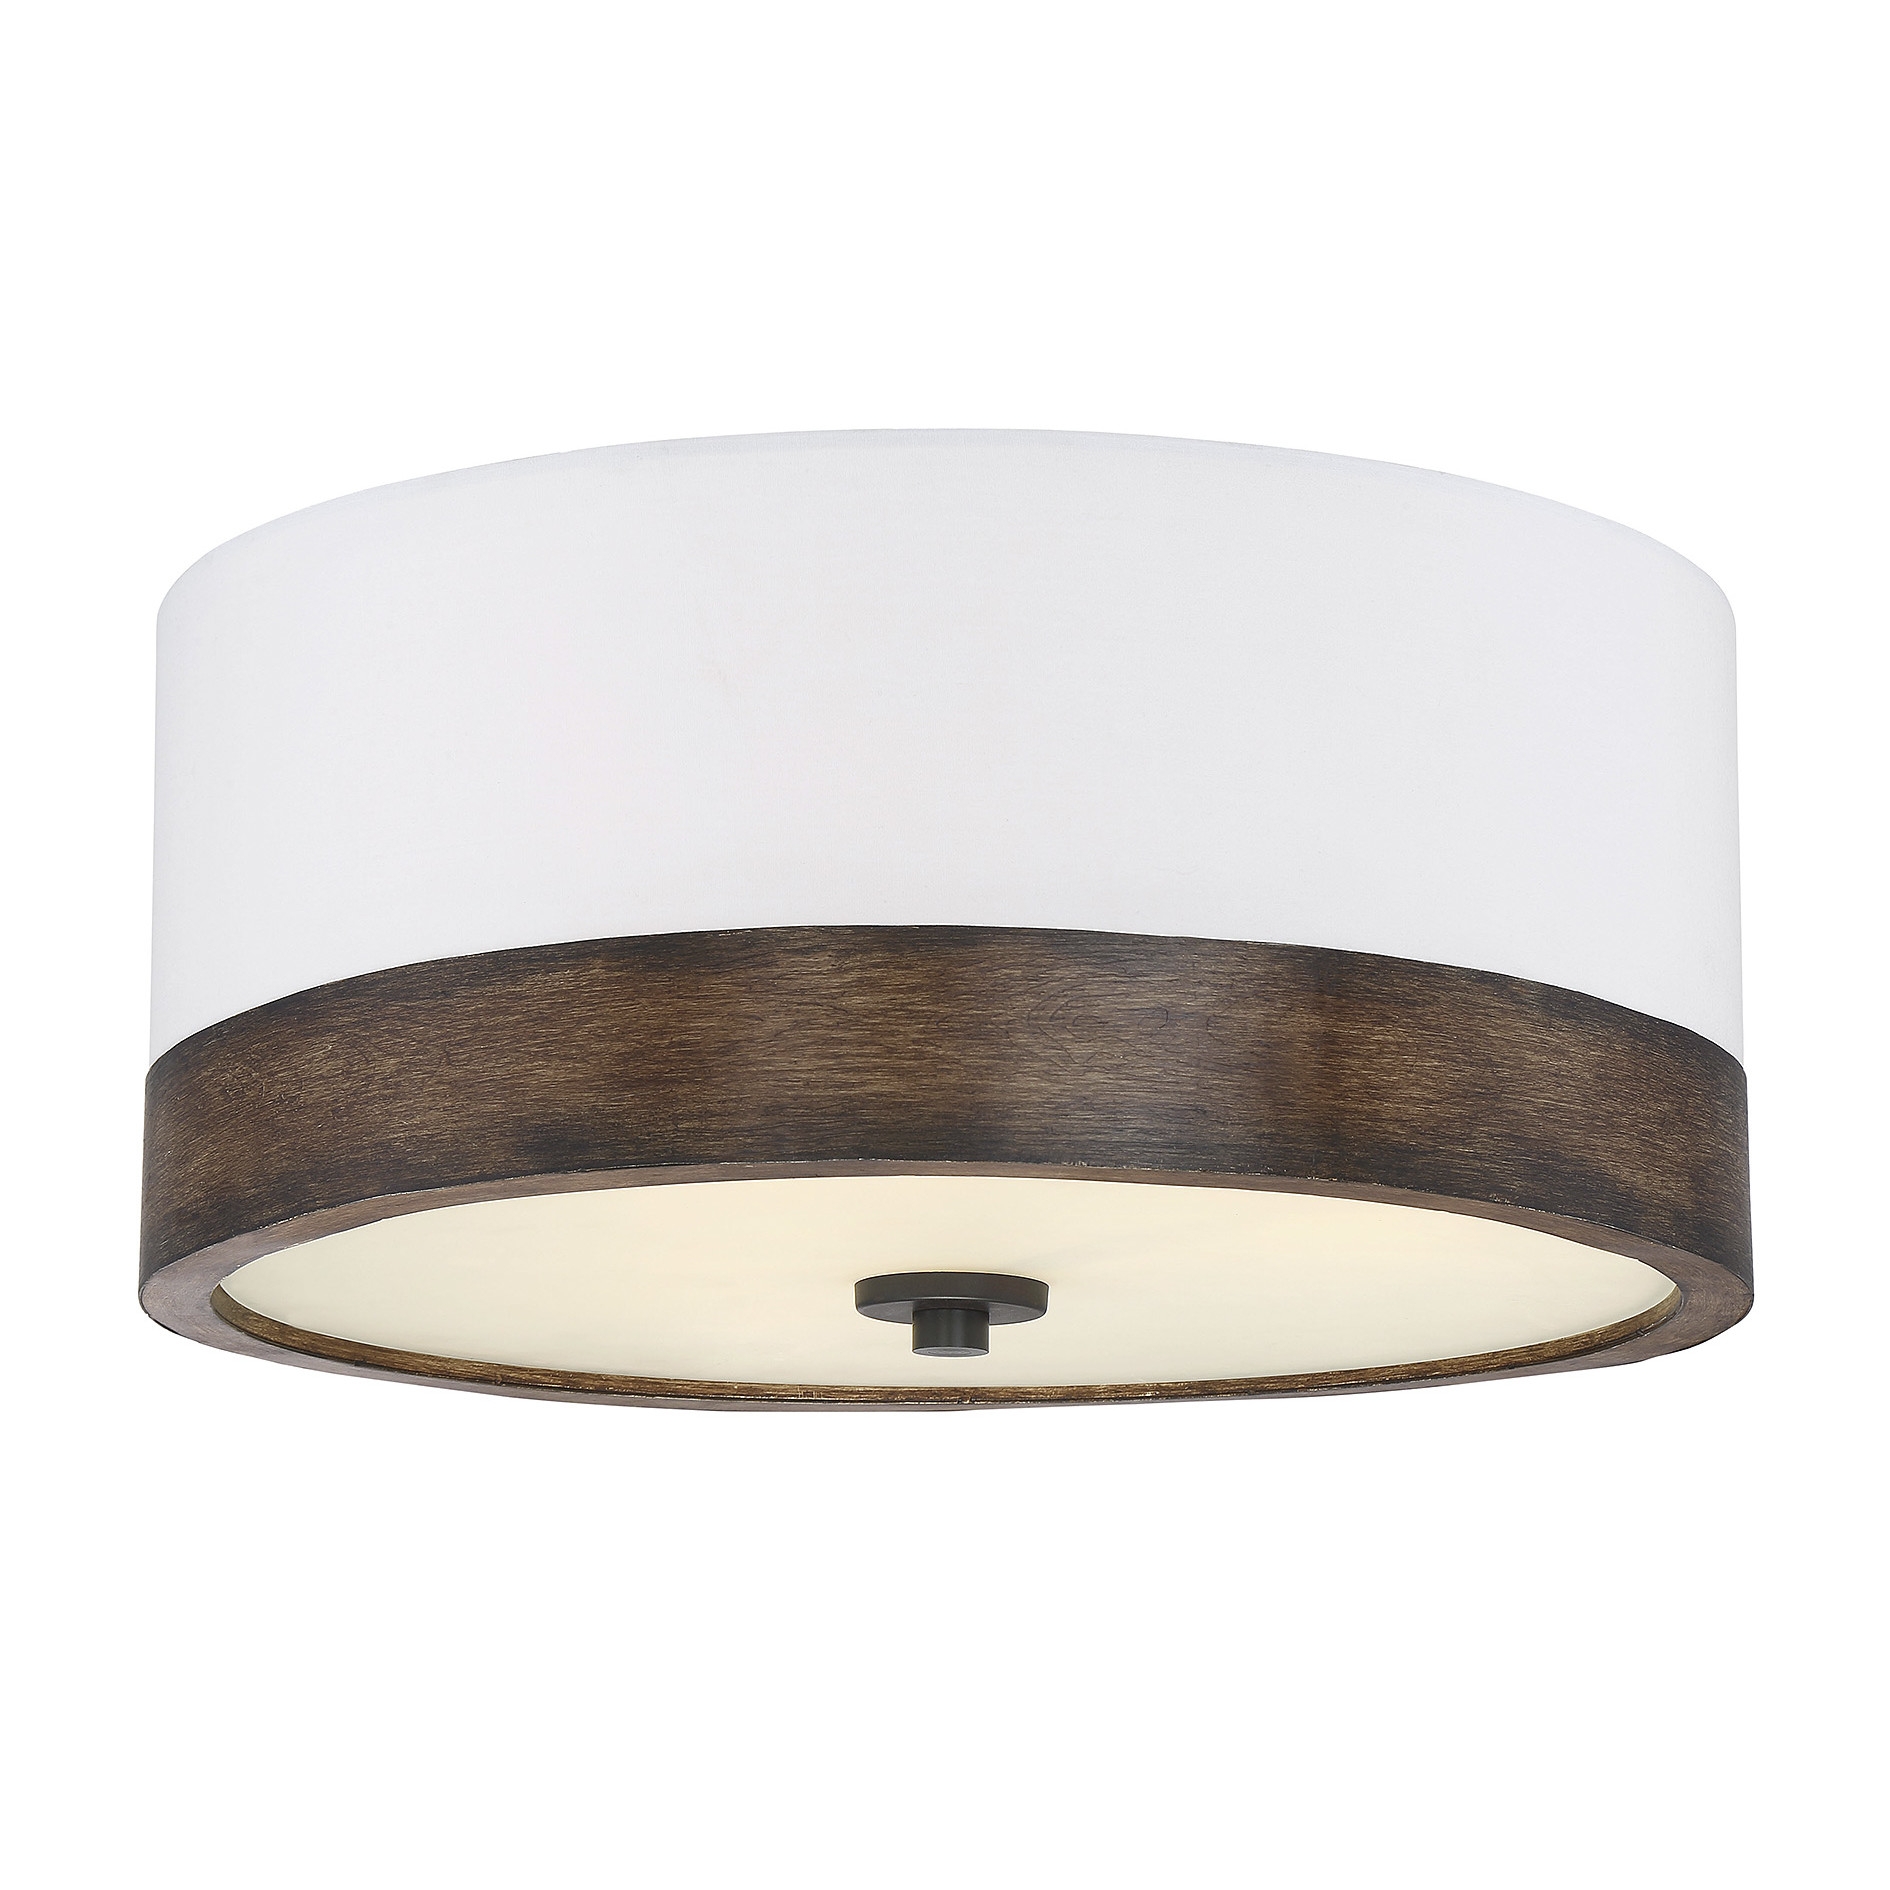 Ceiling Light Mounting Plates